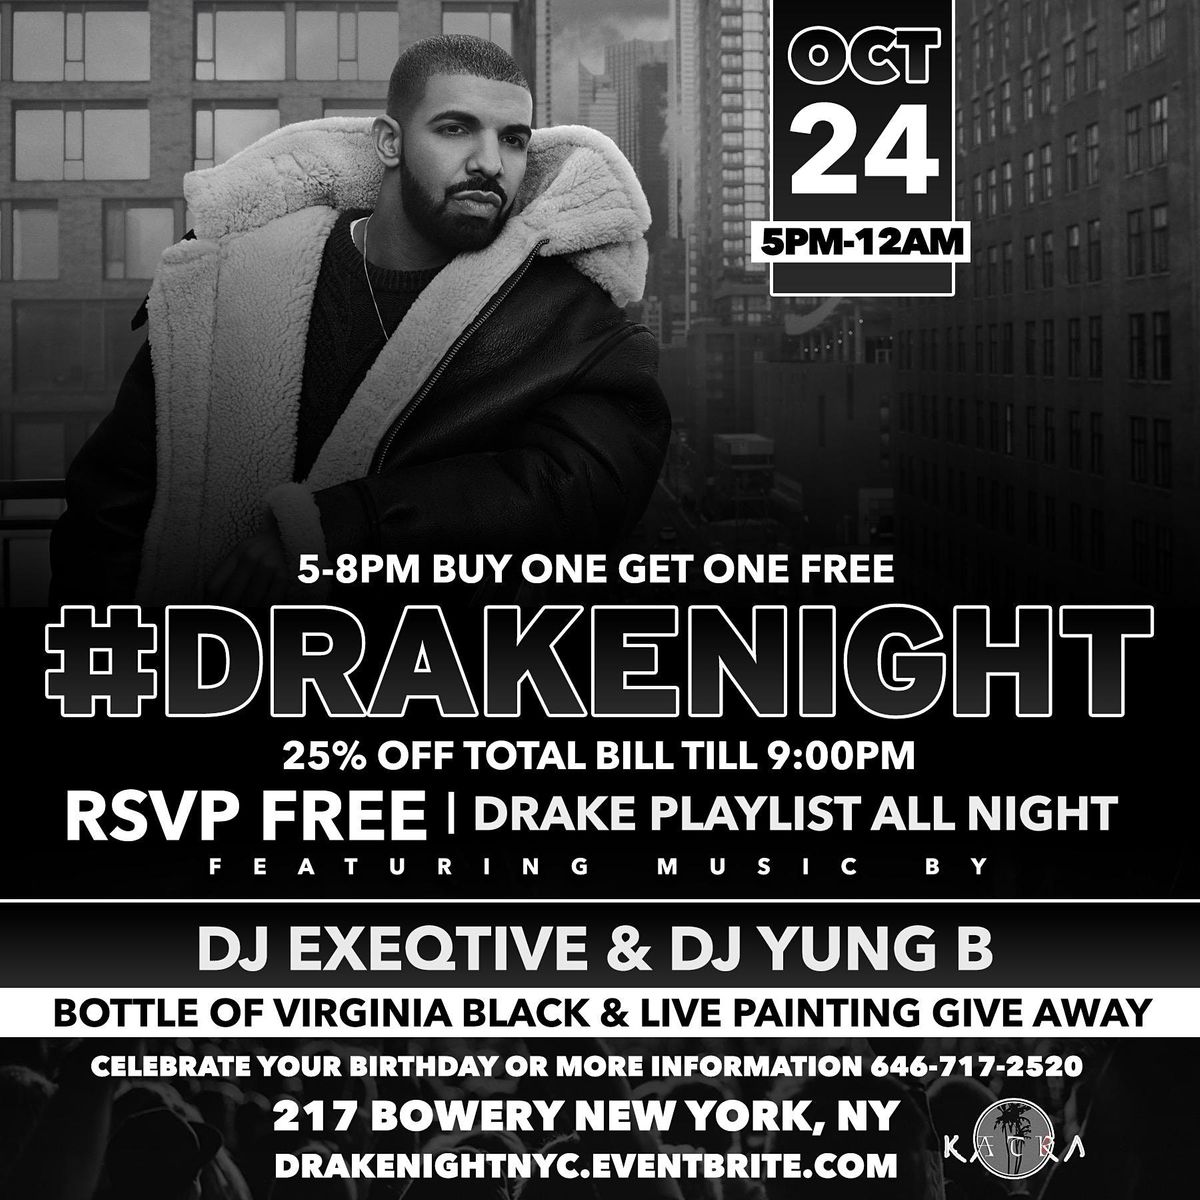 Drake Night Celebration Oct 24th Katra Lounge NYC Octobers Very Own Annual